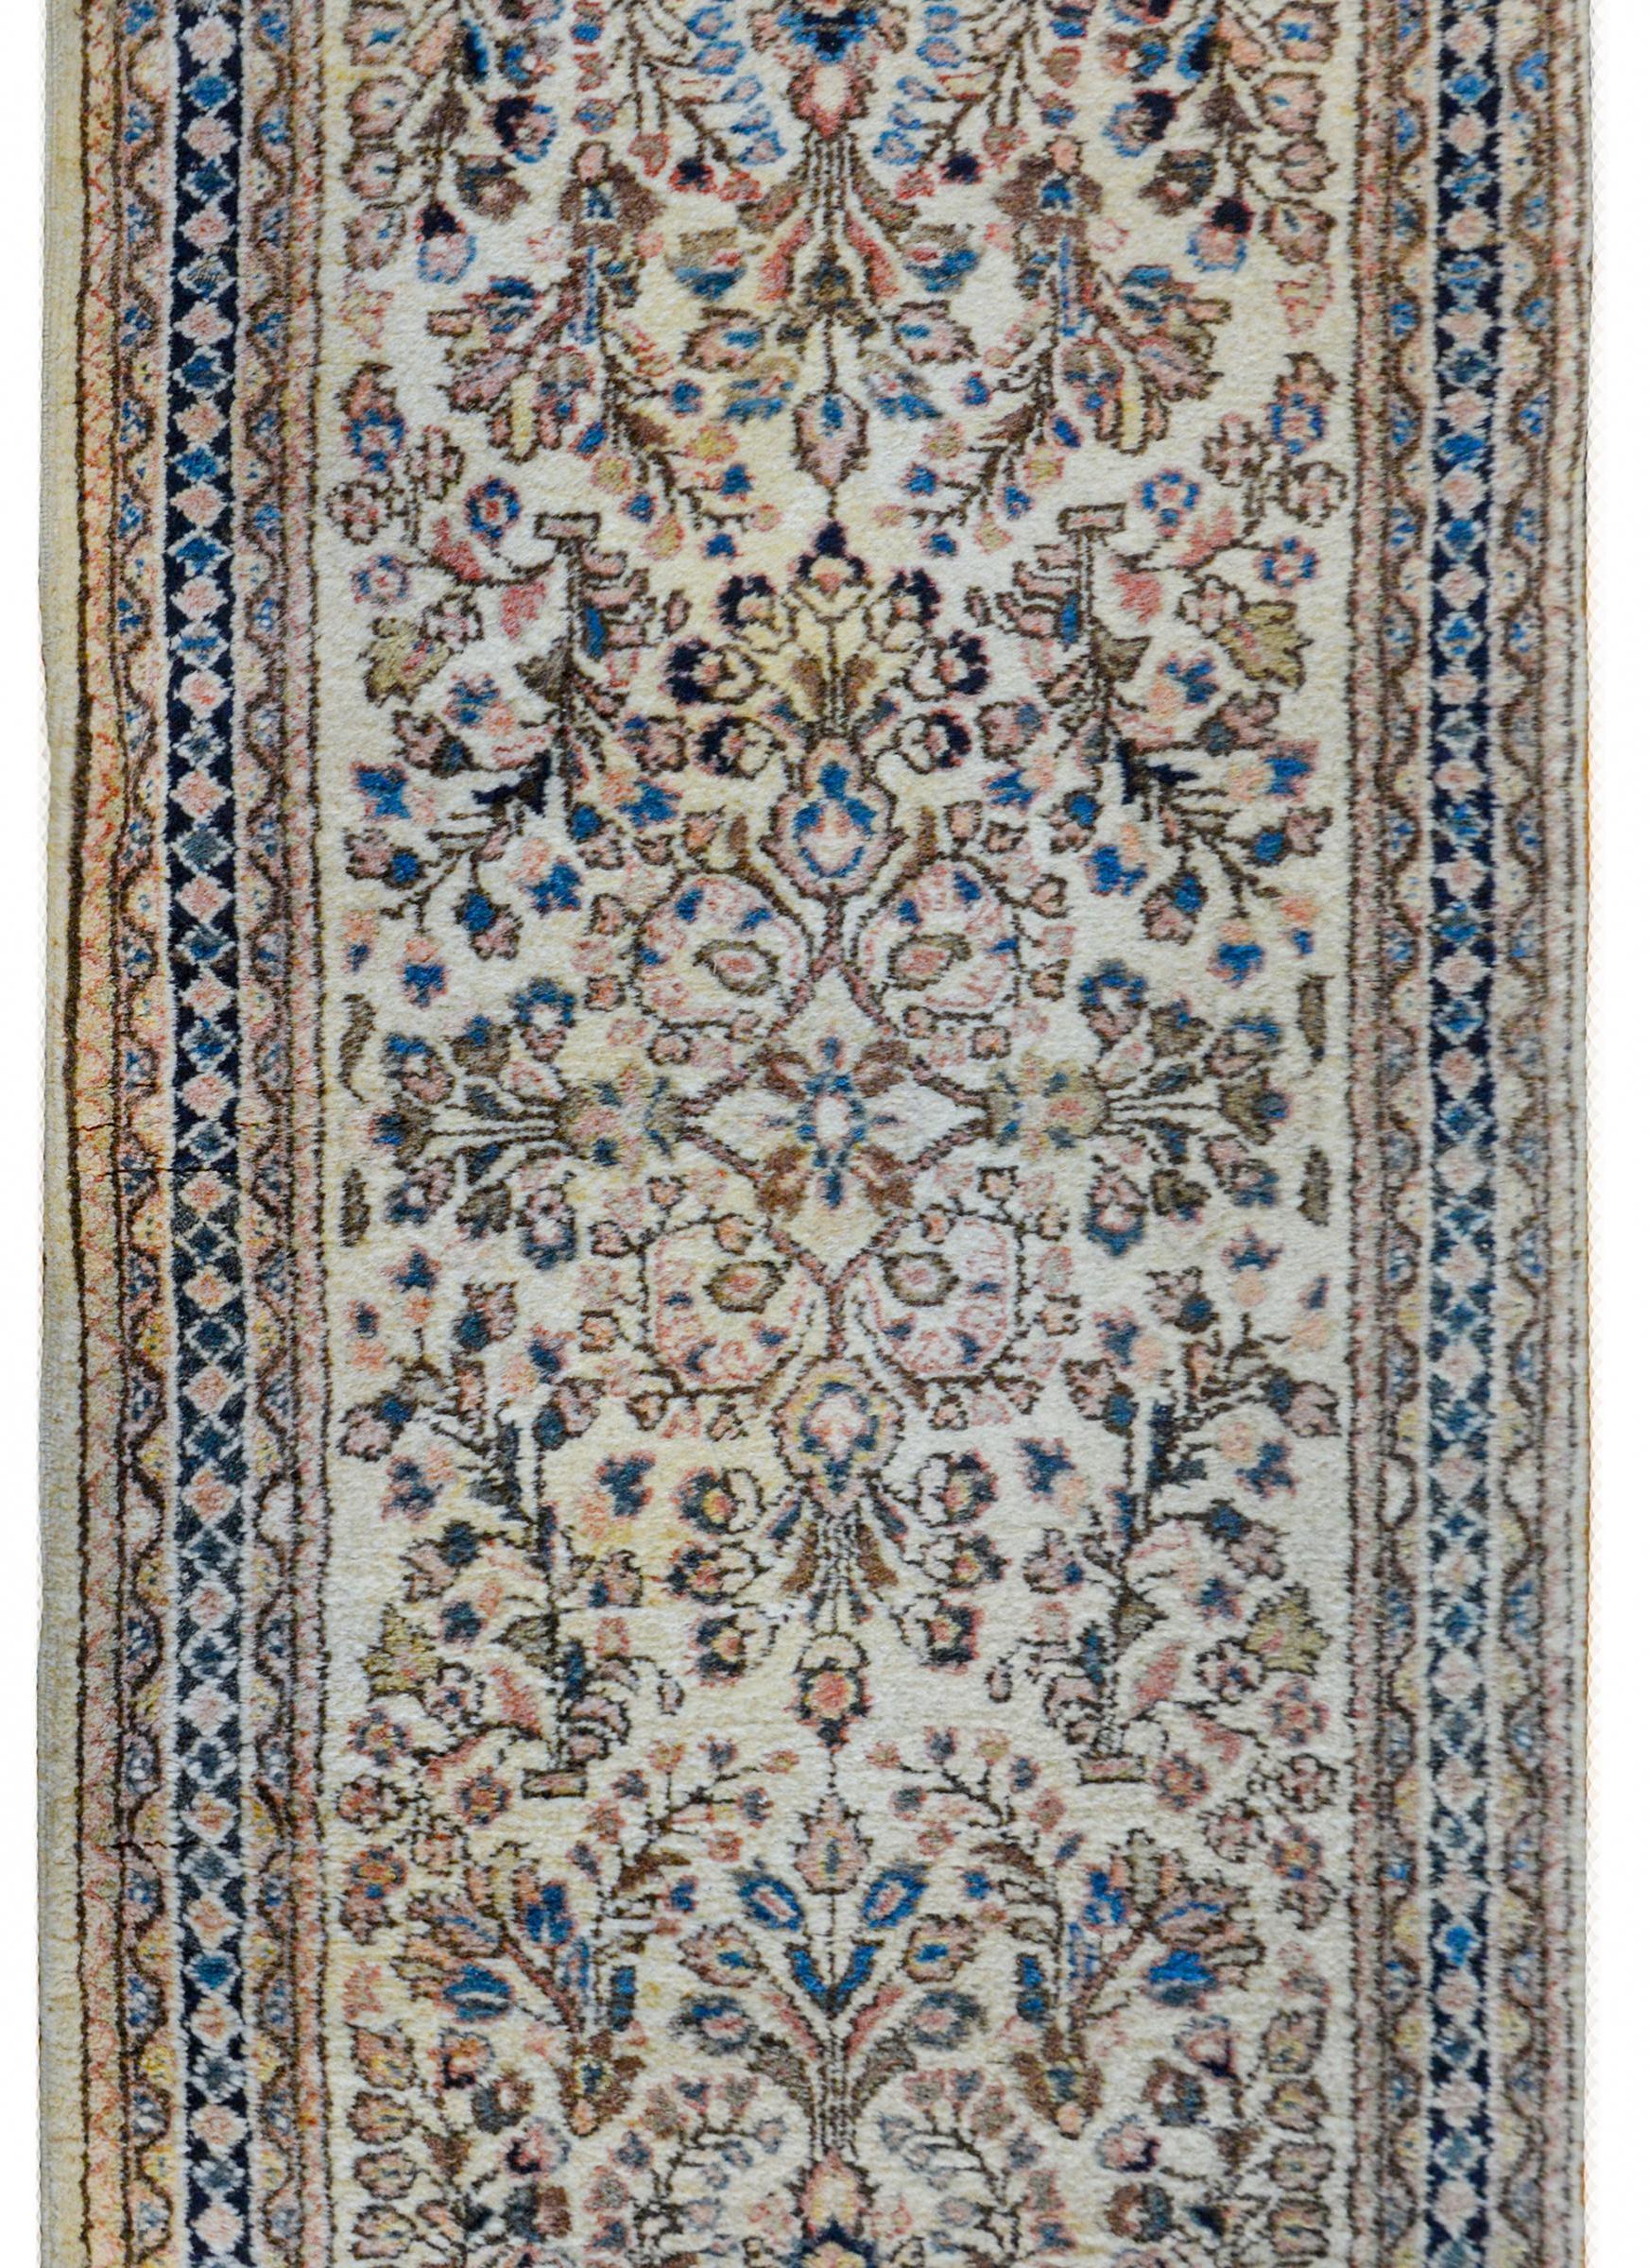 A gorgeous early 20th century Persian Sarouk rug with a wonderful mirrored floral and scrolling vine pattern woven in light and dark indigo, cream, gold, brown, and pink colored vegetable dyed wool, against a natural cream colored background. The